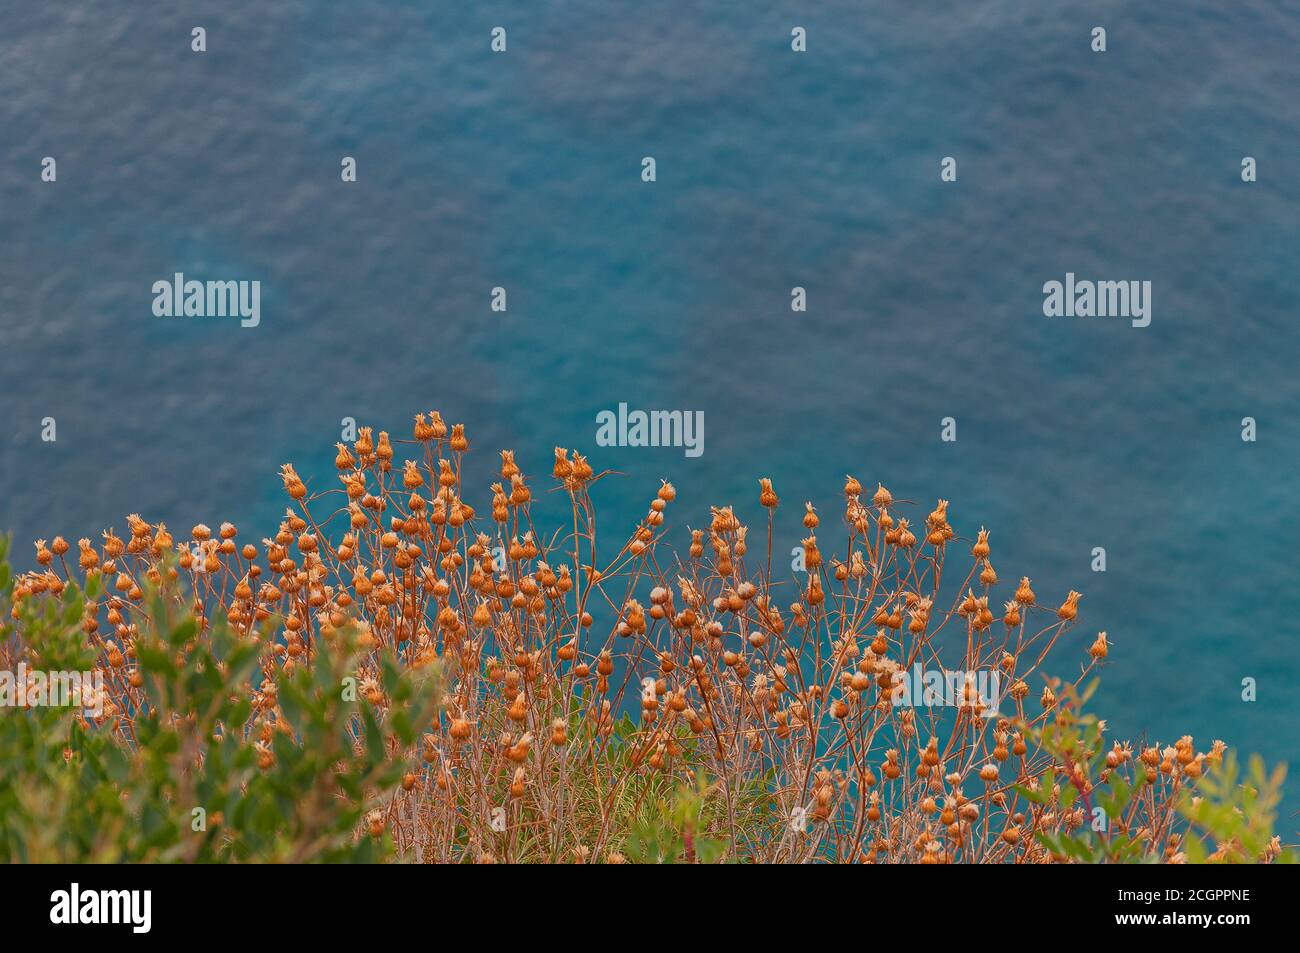 Pistils of yellow plants with turquoise sea in the background, Zakynthos island, Greece Stock Photo